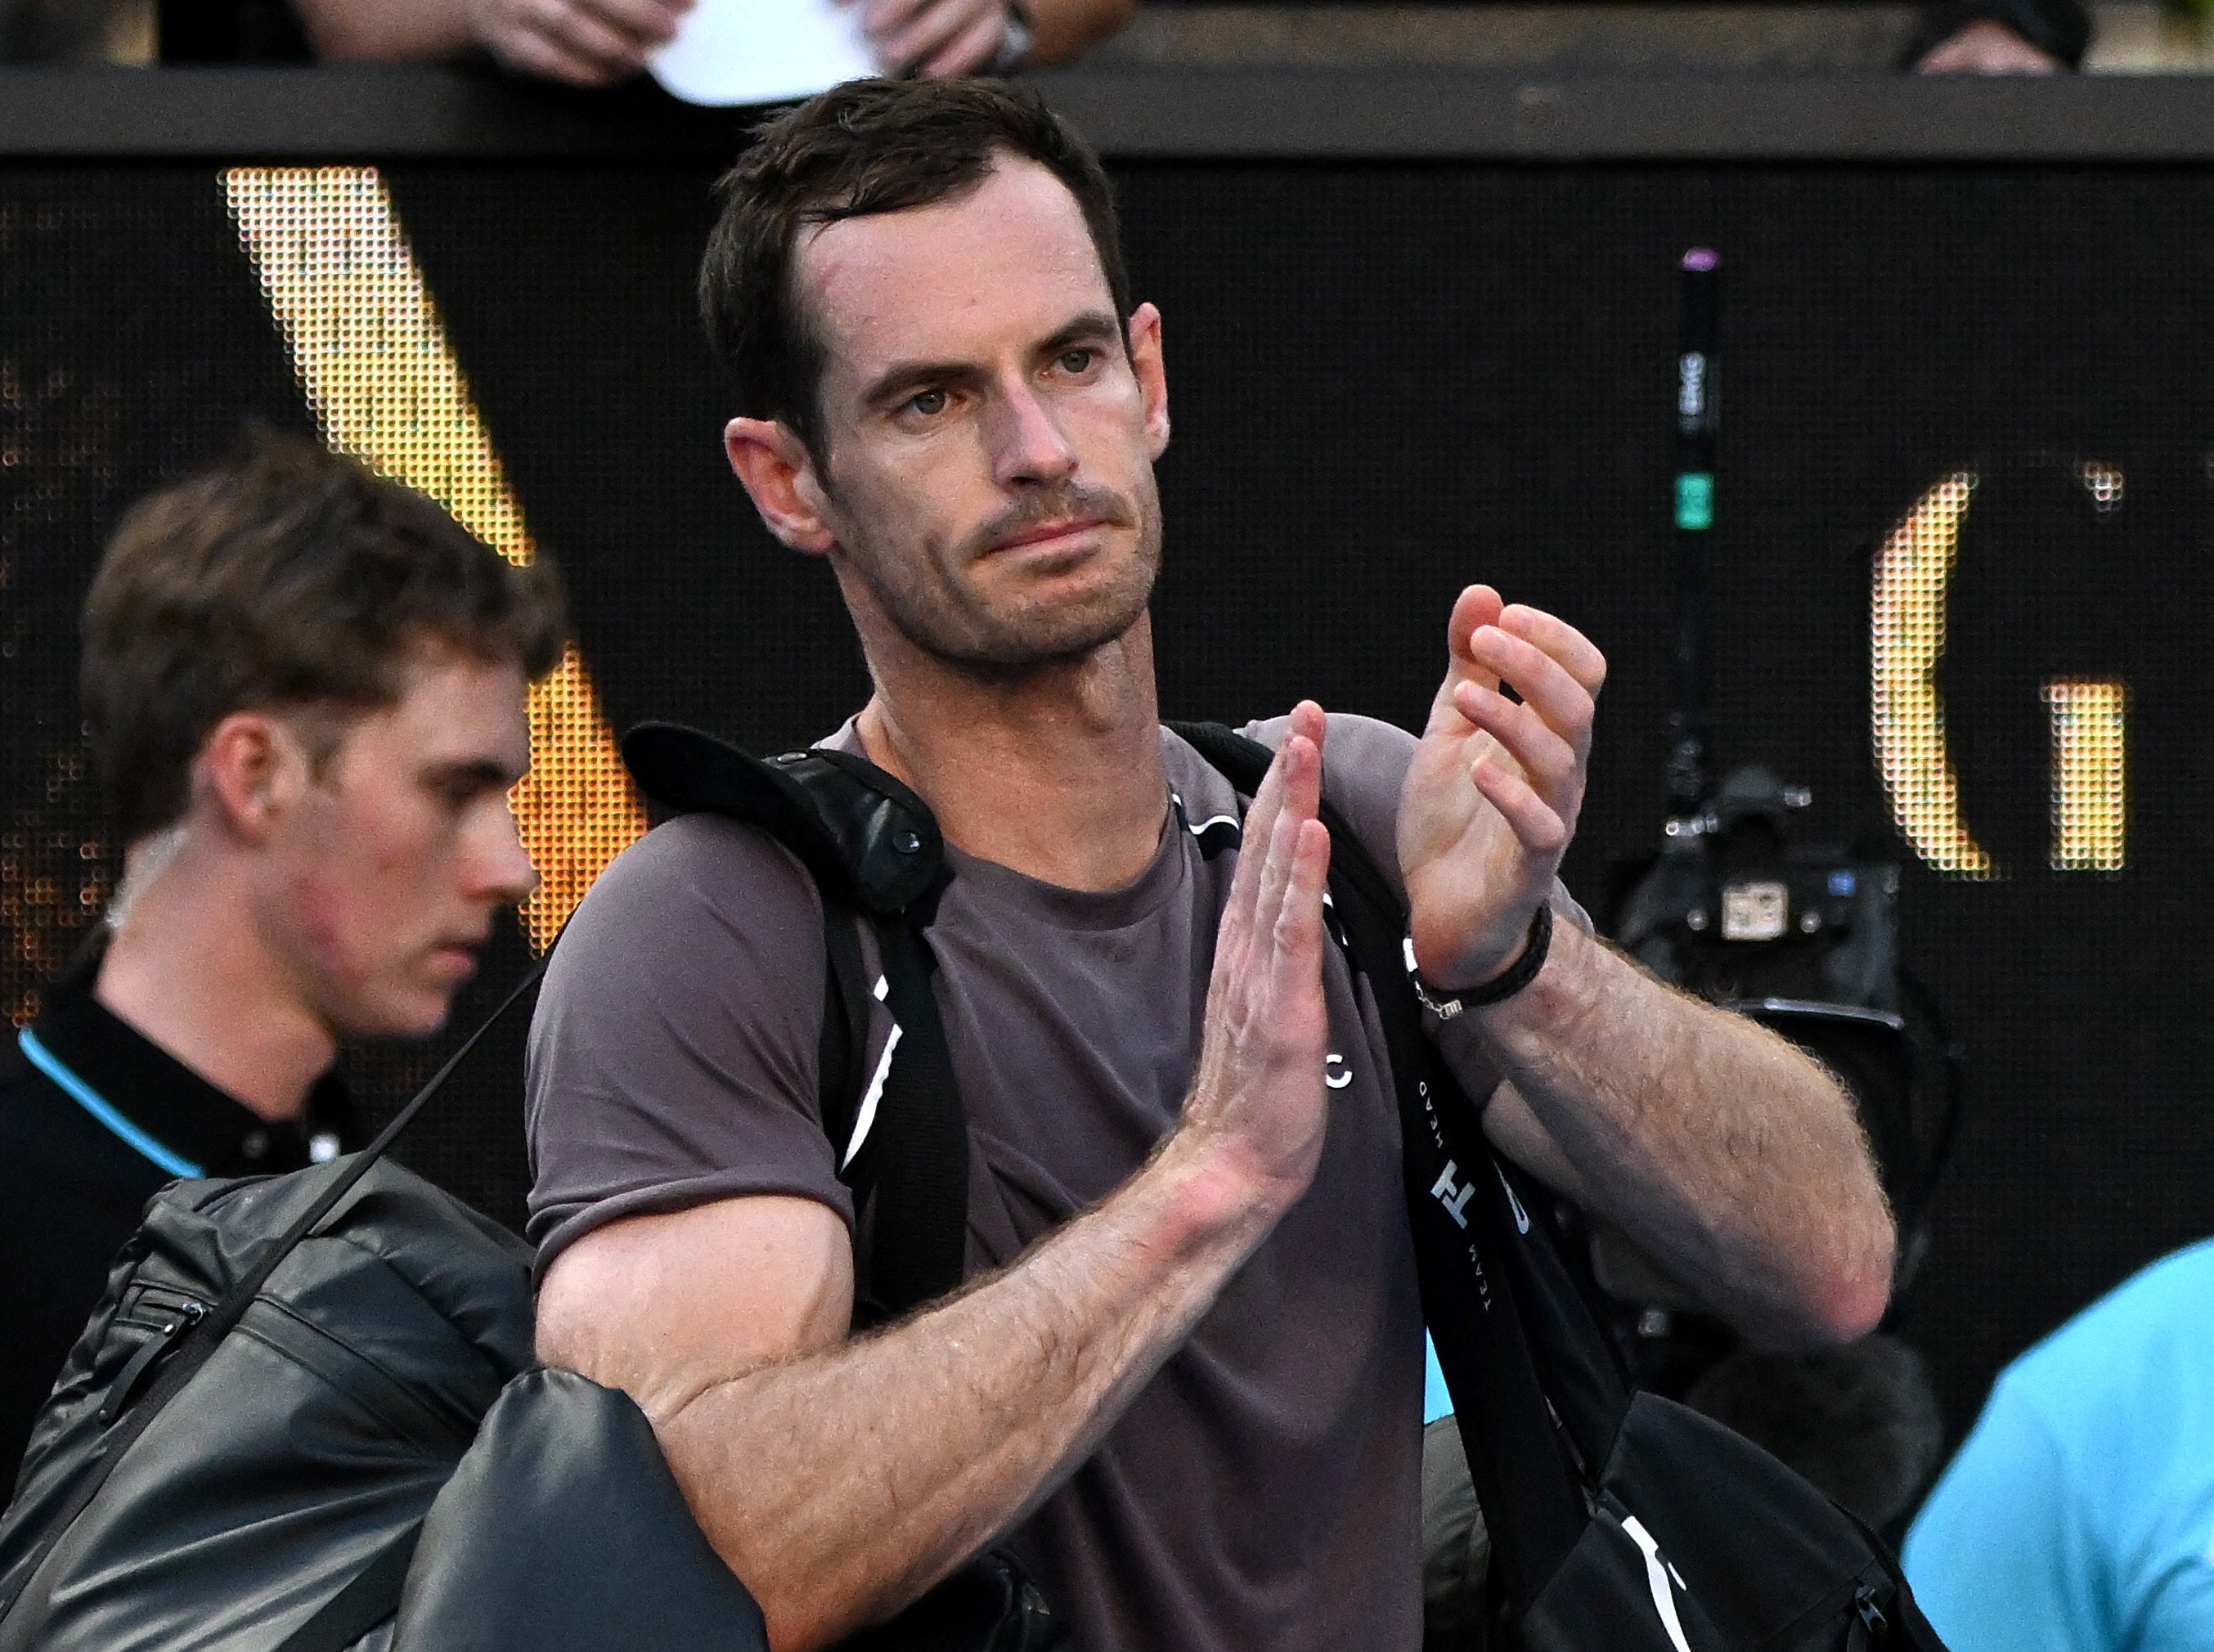 Murray looked emotional as he waved goodbye to the crowd